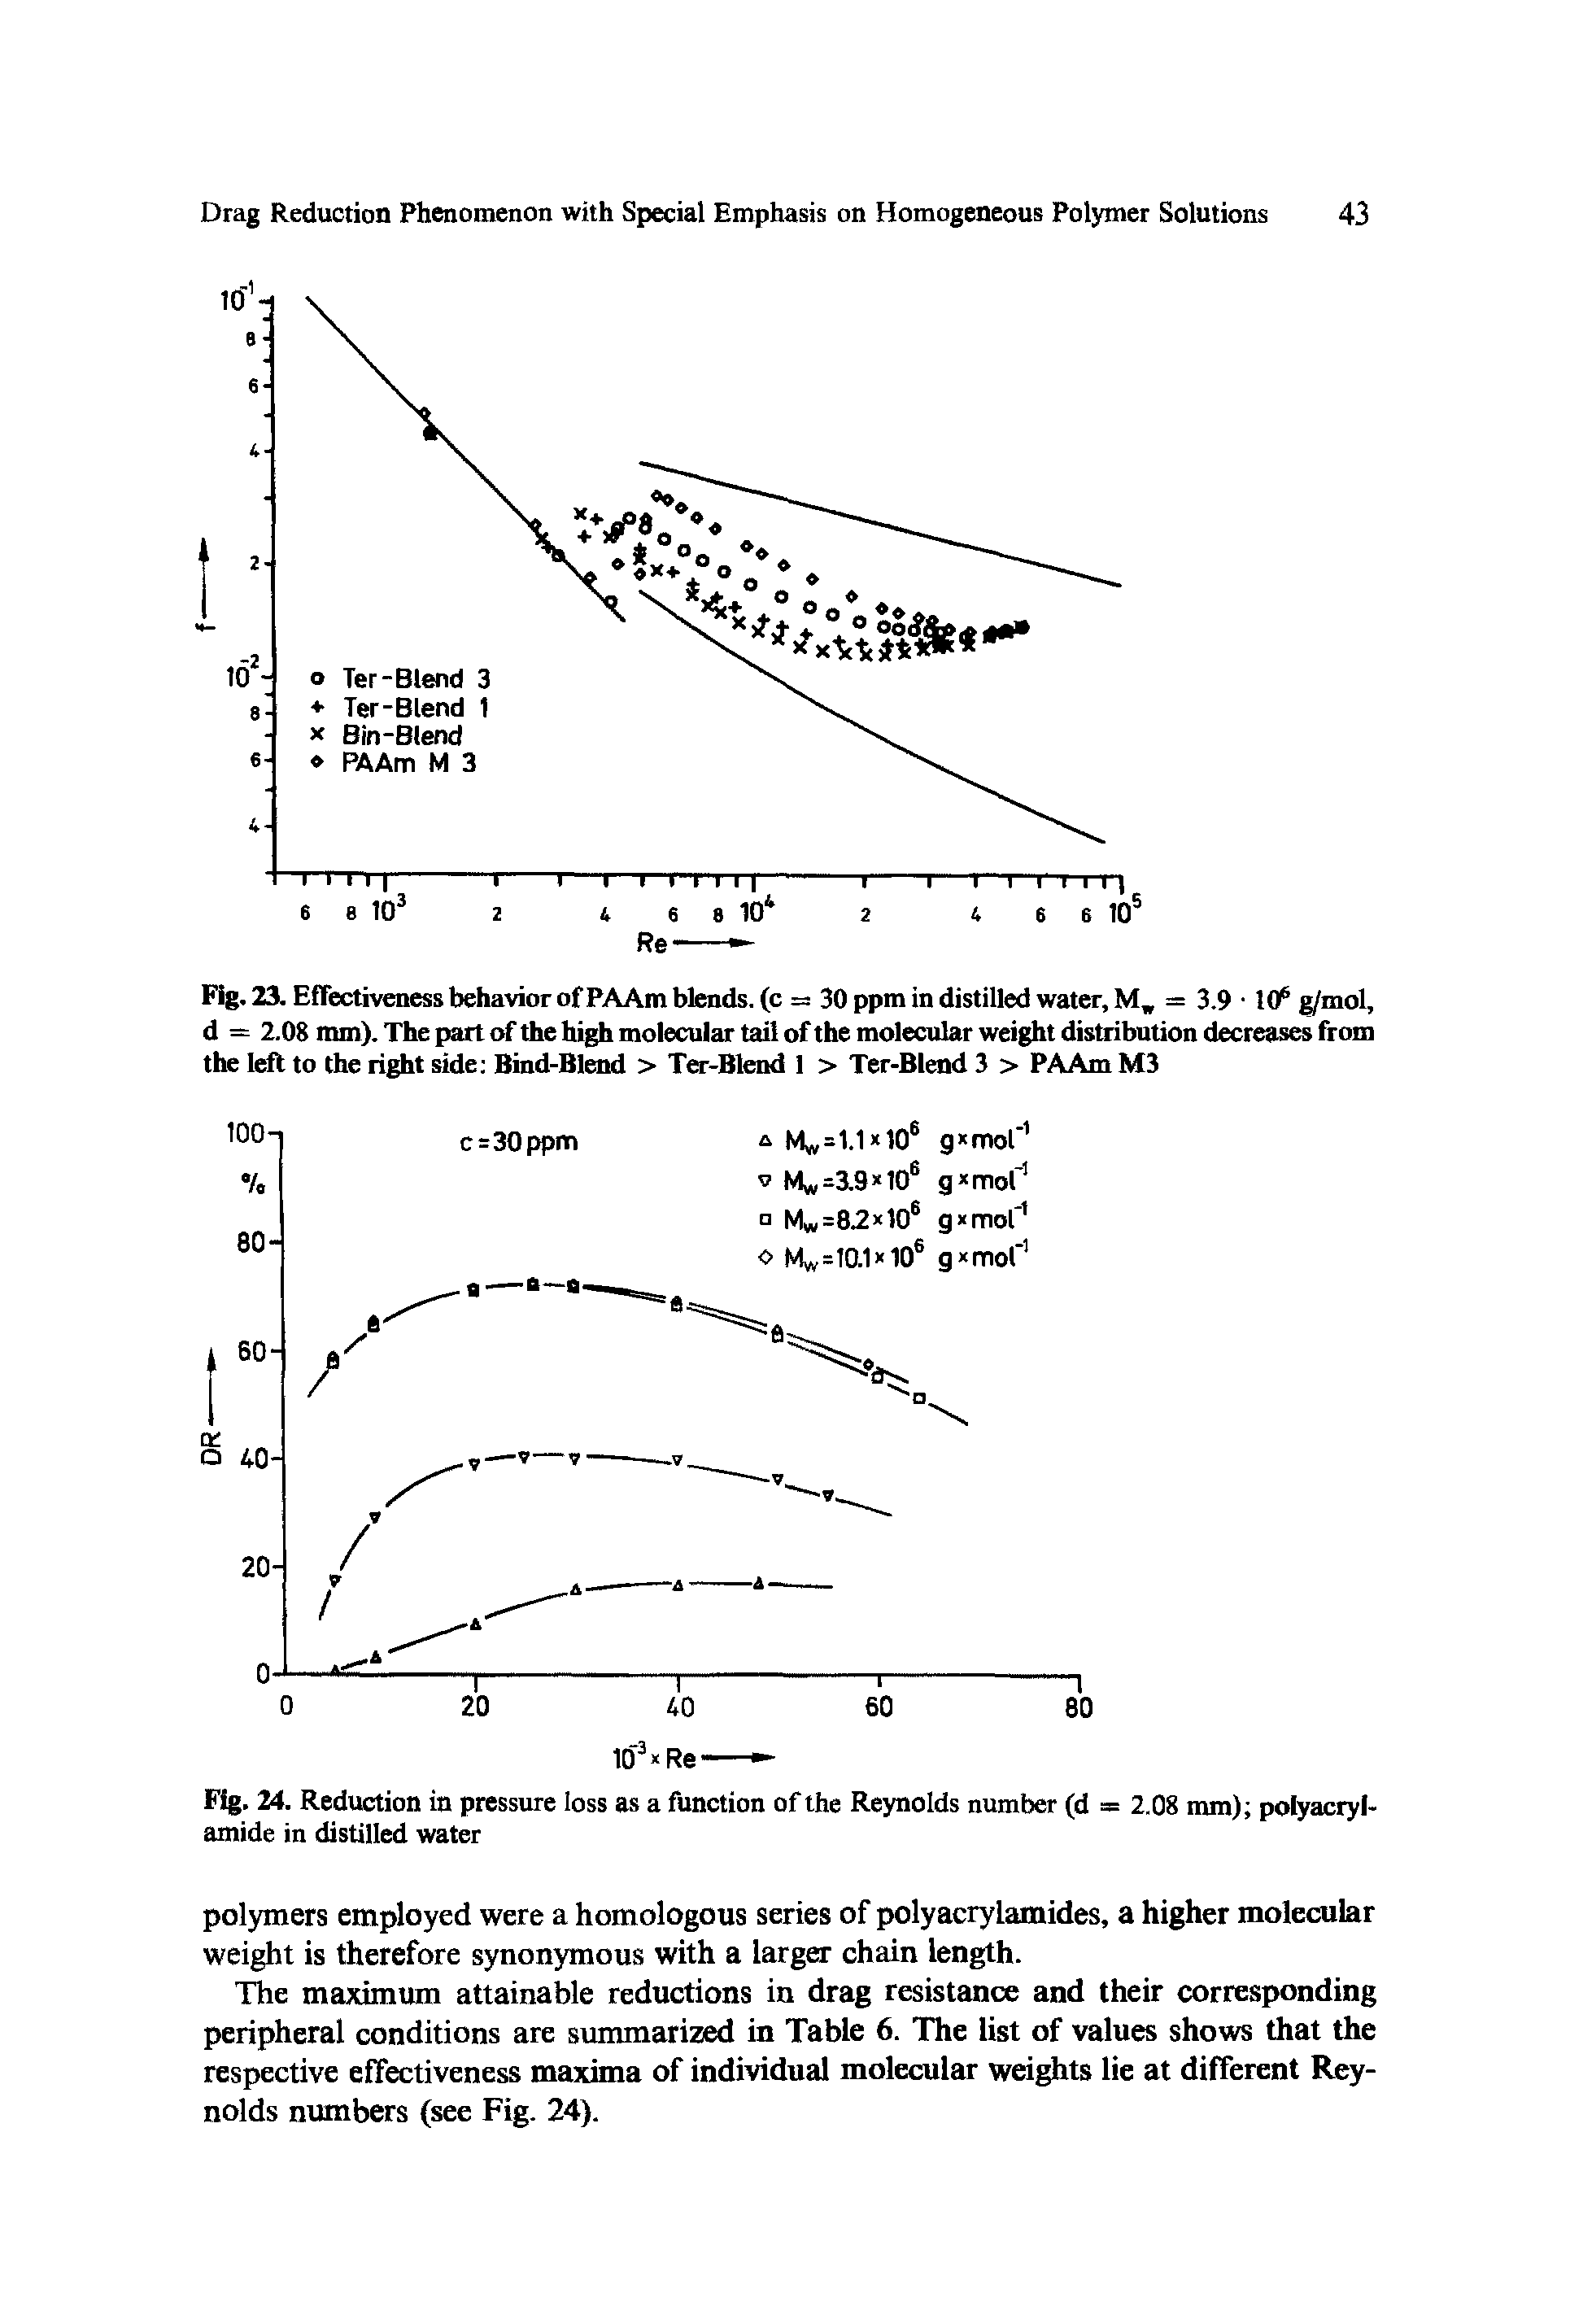 Fig. 23. Effectiveness behavior of PAAm blends, (c = 30 ppm in distilled water, Mw = 3.9 106 g/mol, d = 2.08 mm). The part of the high molecular tail of the molecular weight distribution decreases from the left to the right side Bind-Blend > Ter-Blend 1 > Ter-Blend 3 > PAAm M3...